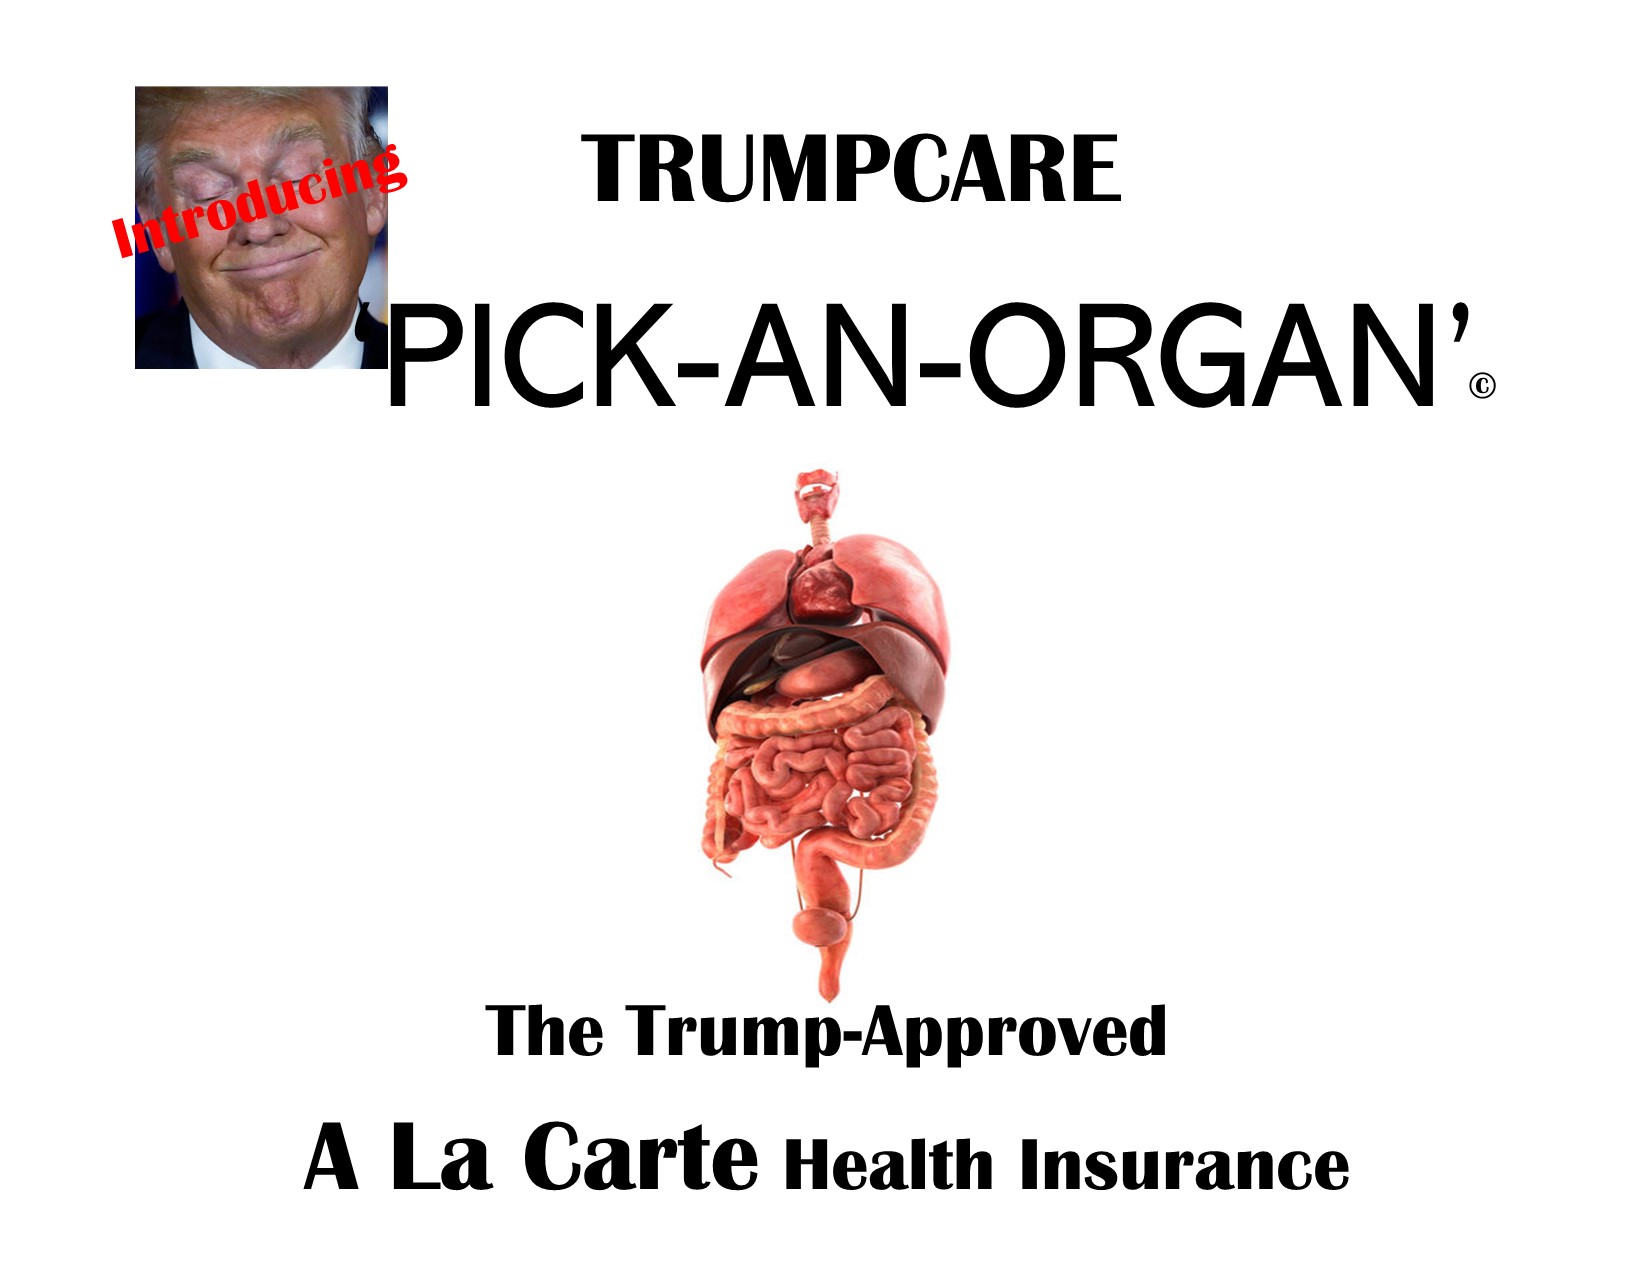 Breaking News: Having Experienced COVID-19 For Himself, Trump Reveals His New, Trump-Style Health Care Plan: It’s Called “TrumpCare PICK-AN-ORGAN”